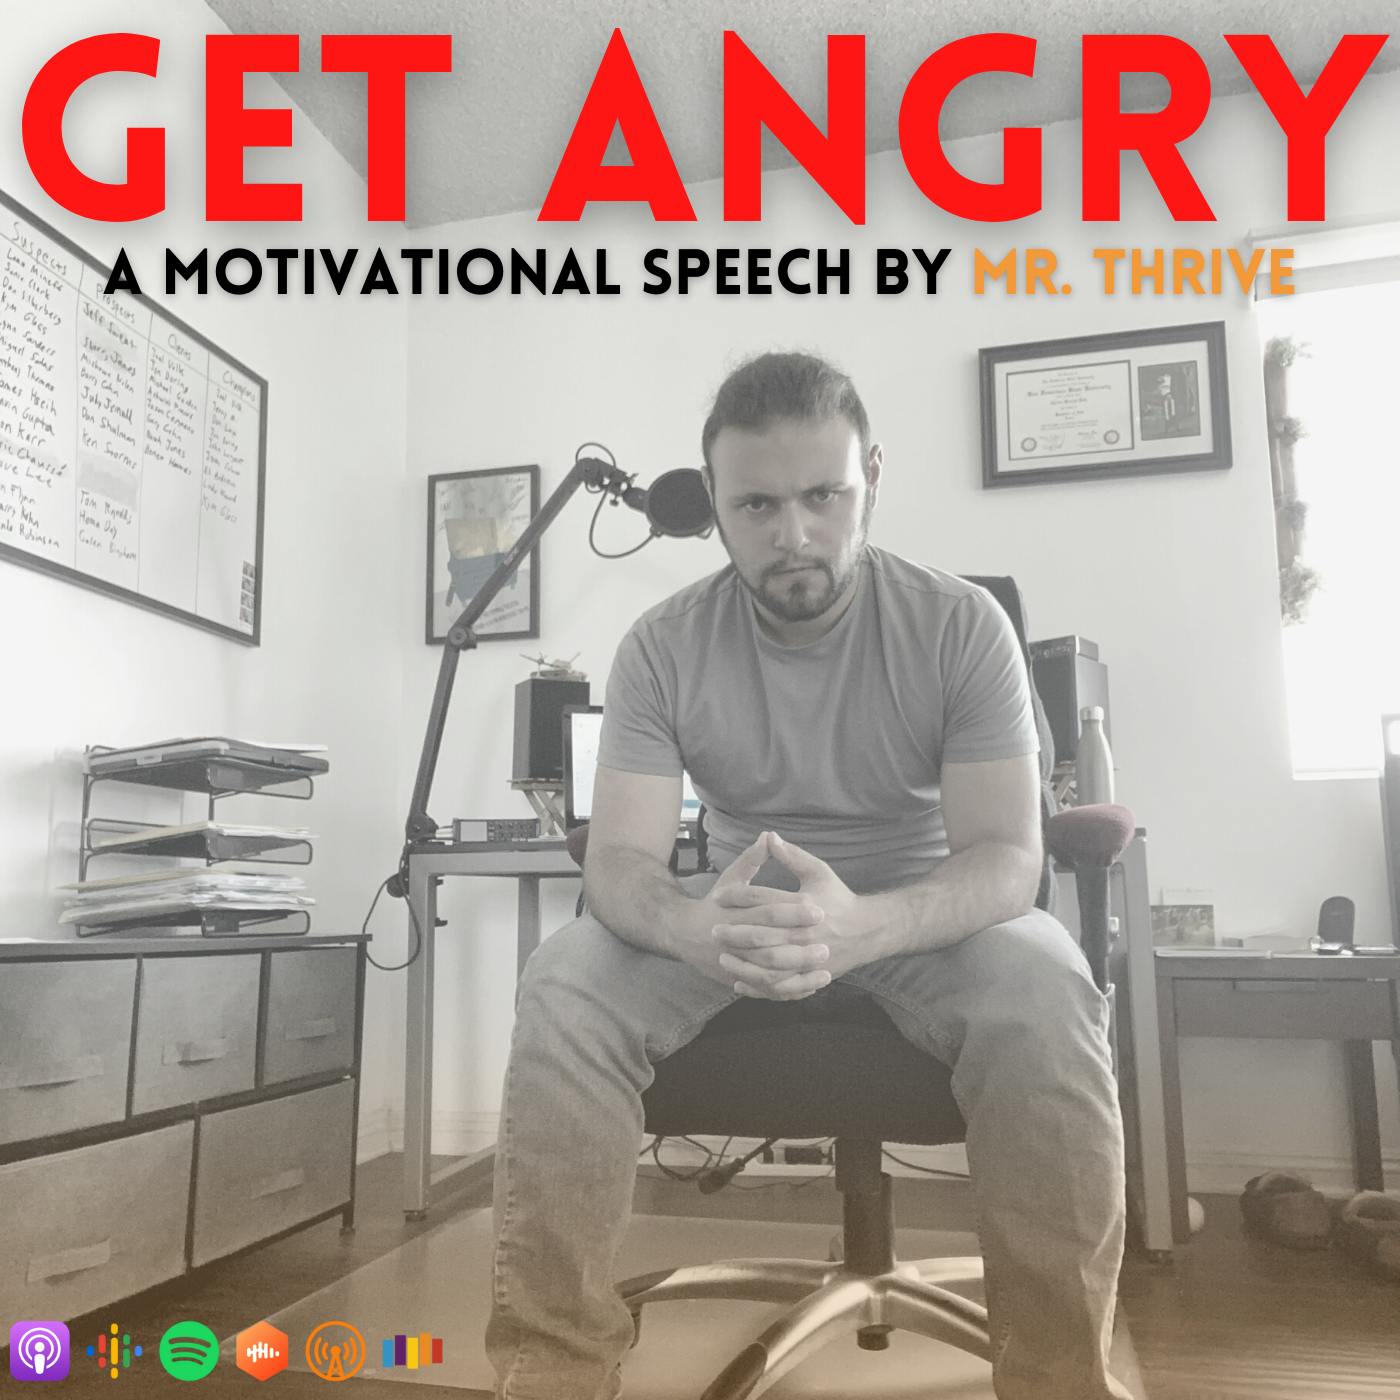 SPECIAL - Mr. Thrive's FIRST Motivational Speech: GET ANGRY